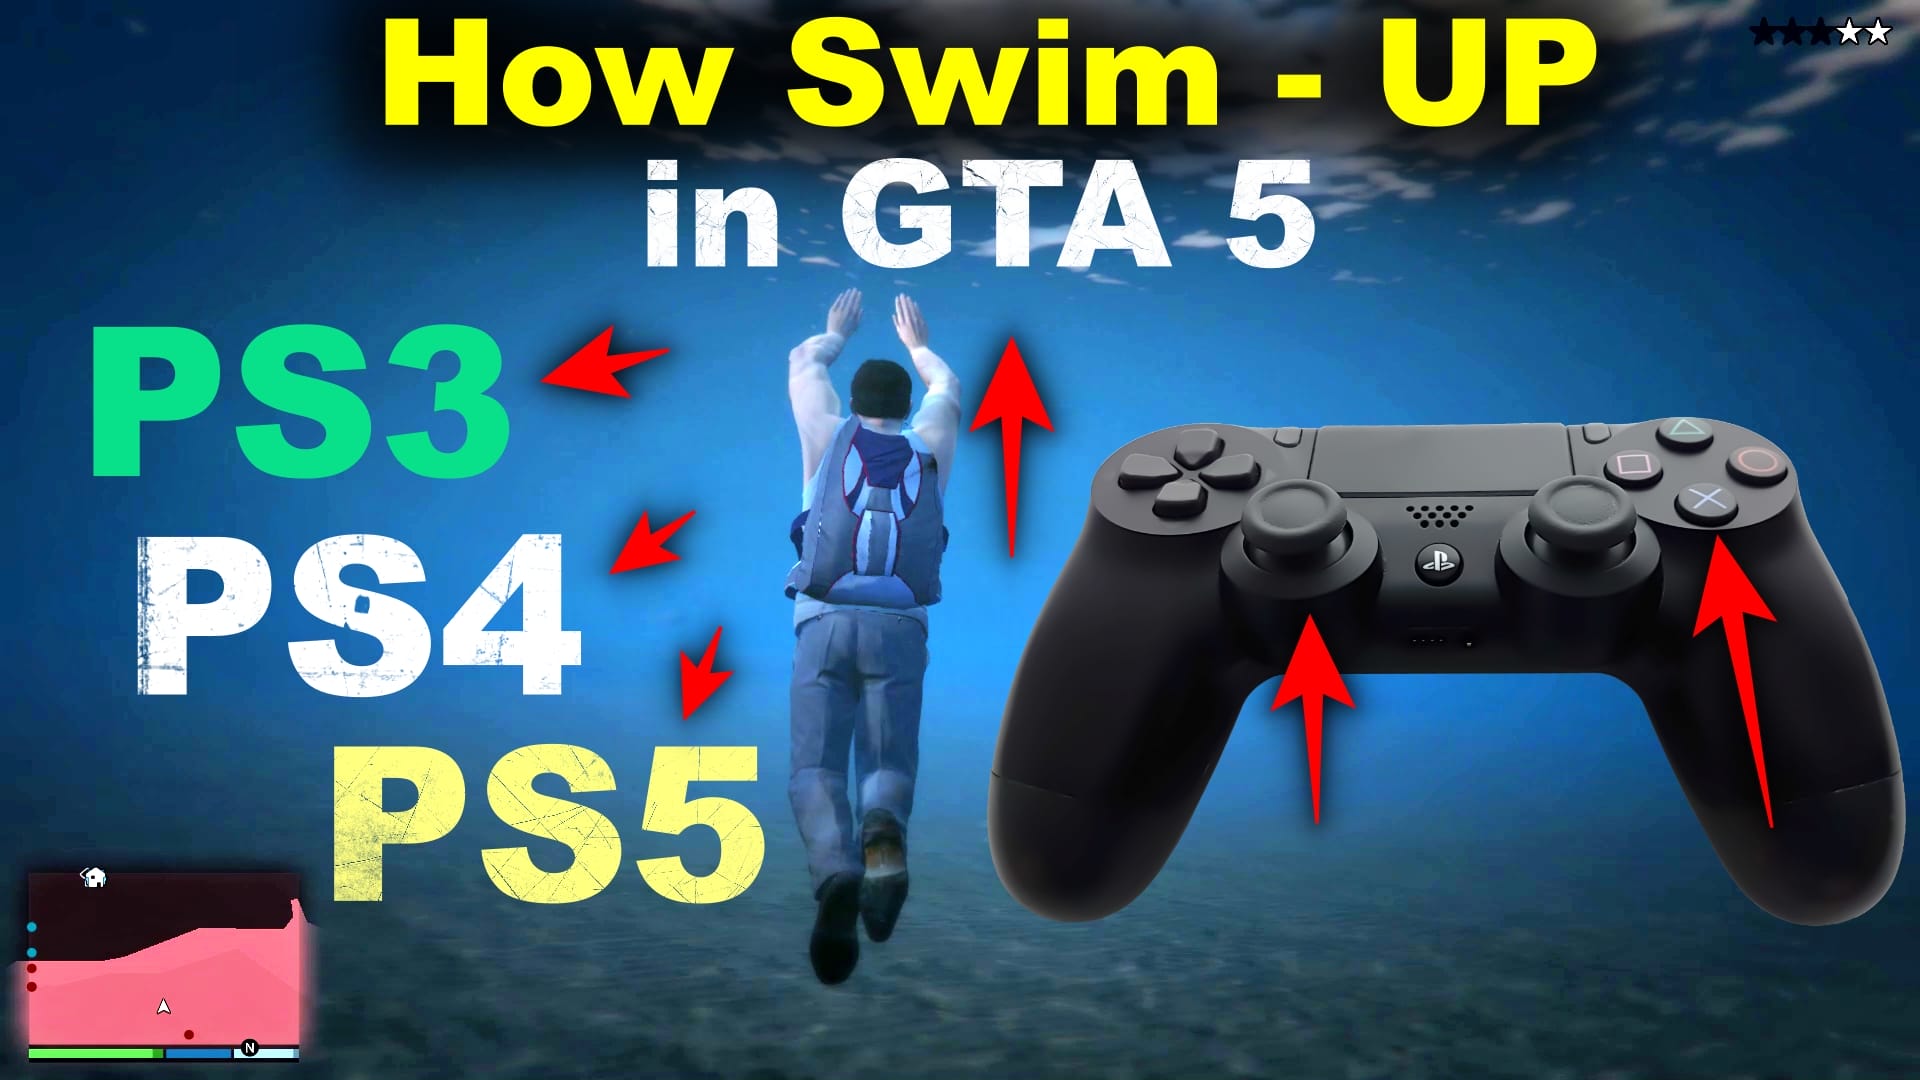 how to swim up in GTA 5 - PS3, PS4, PS5